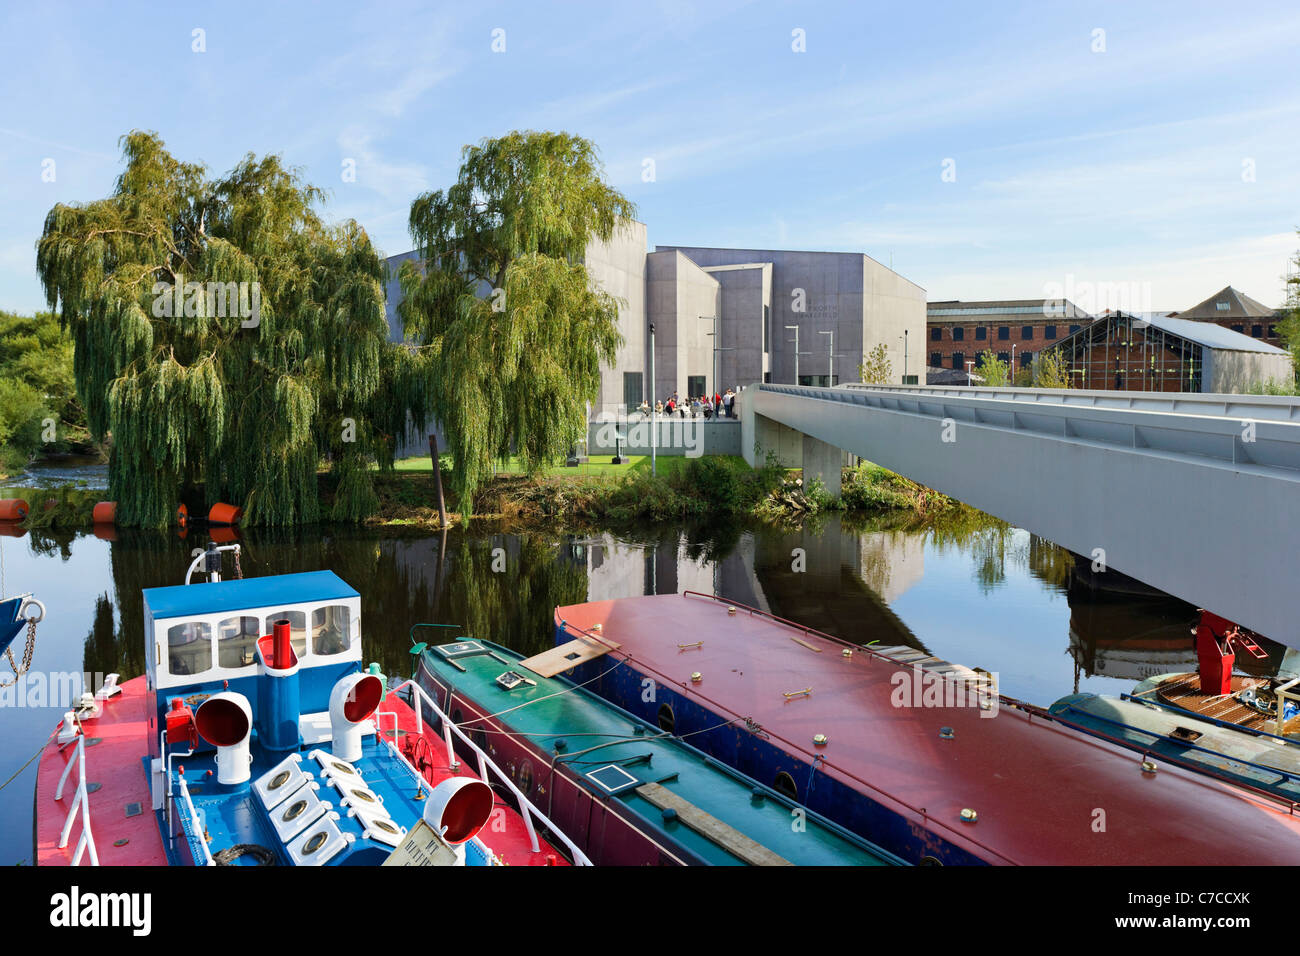 The Hepworth Wakefield art gallery viewed from across the River Calder, Wakefield, West Yorkshire, UK Stock Photo